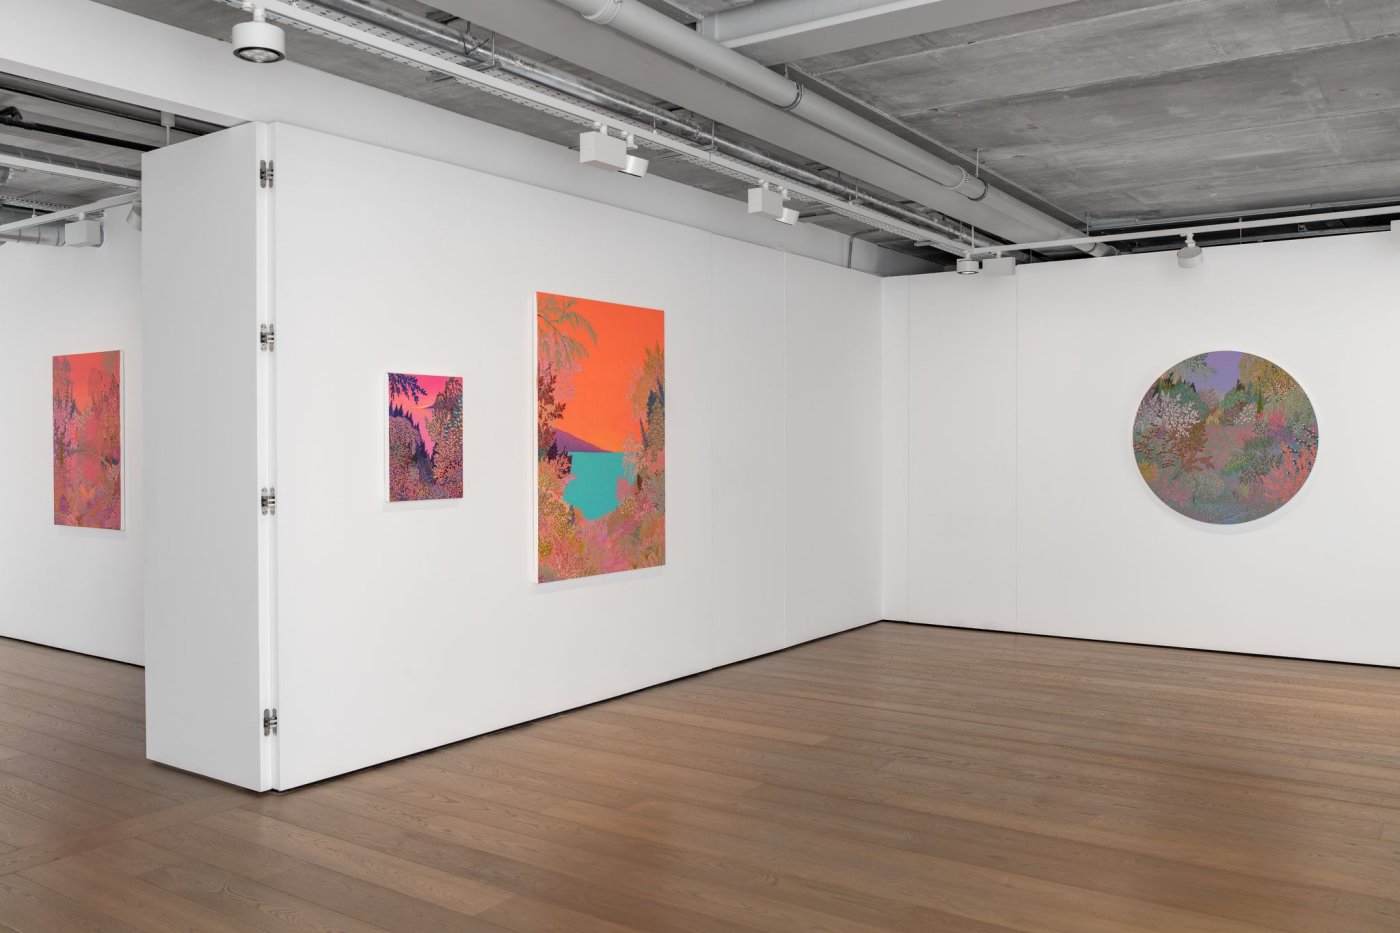 Installation image for John McAllister: some rhapsodies radiant, at Almine Rech